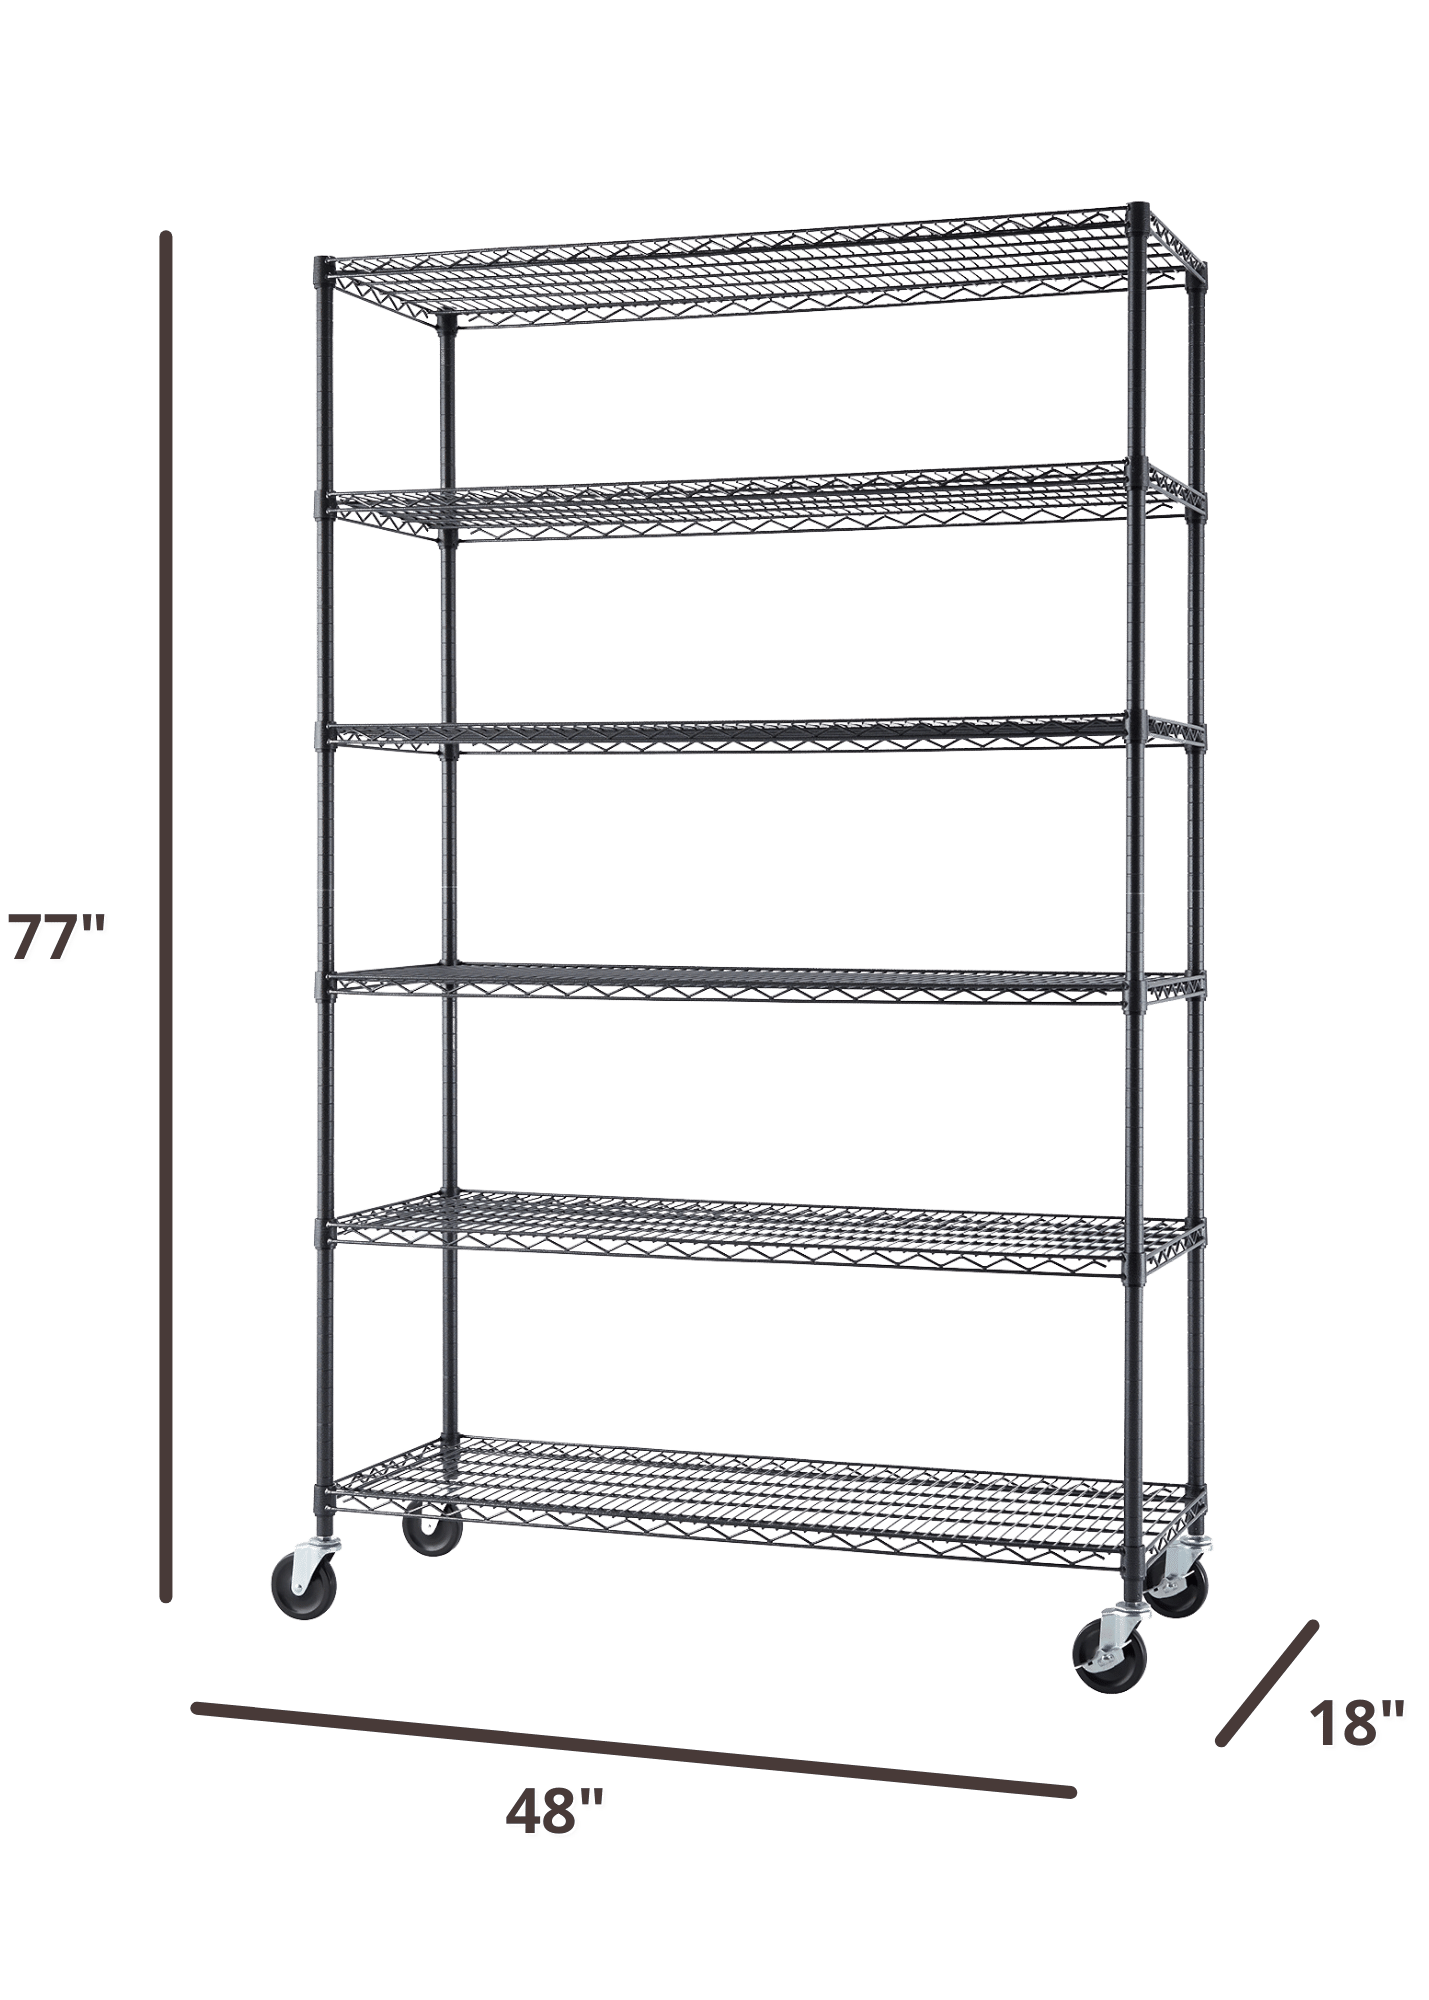 77 inhces tall by 48 inches wide wire shelving rack with 6 shelves and wheels